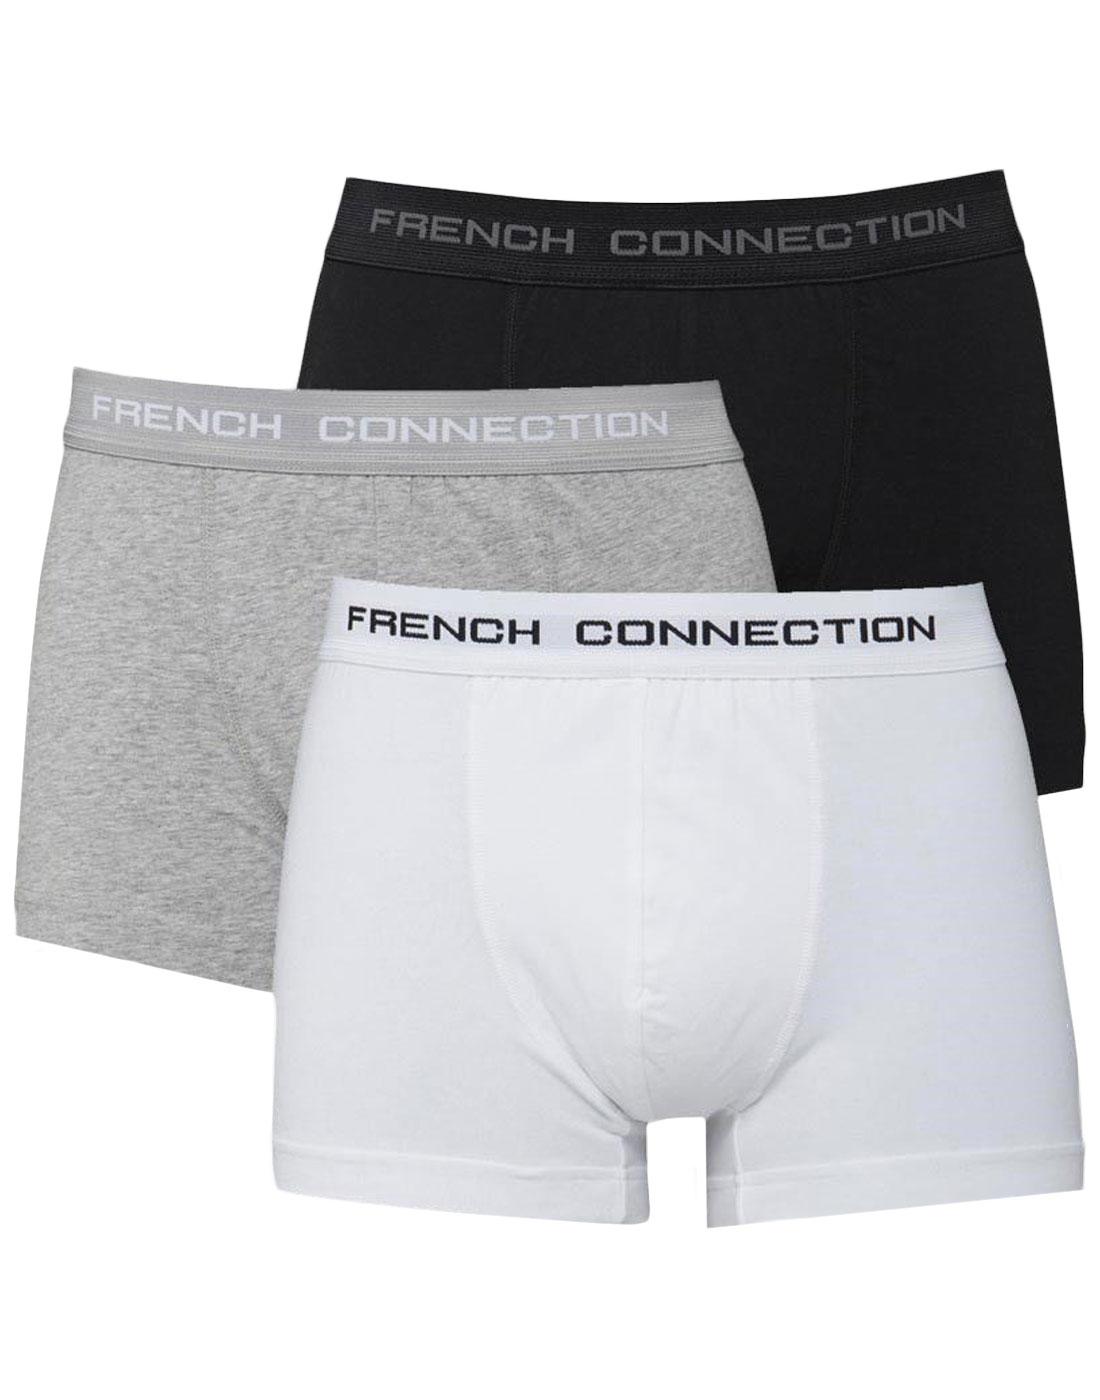 + FRENCH CONNECTION 3 Pack Boxer Shorts (B/G/W)